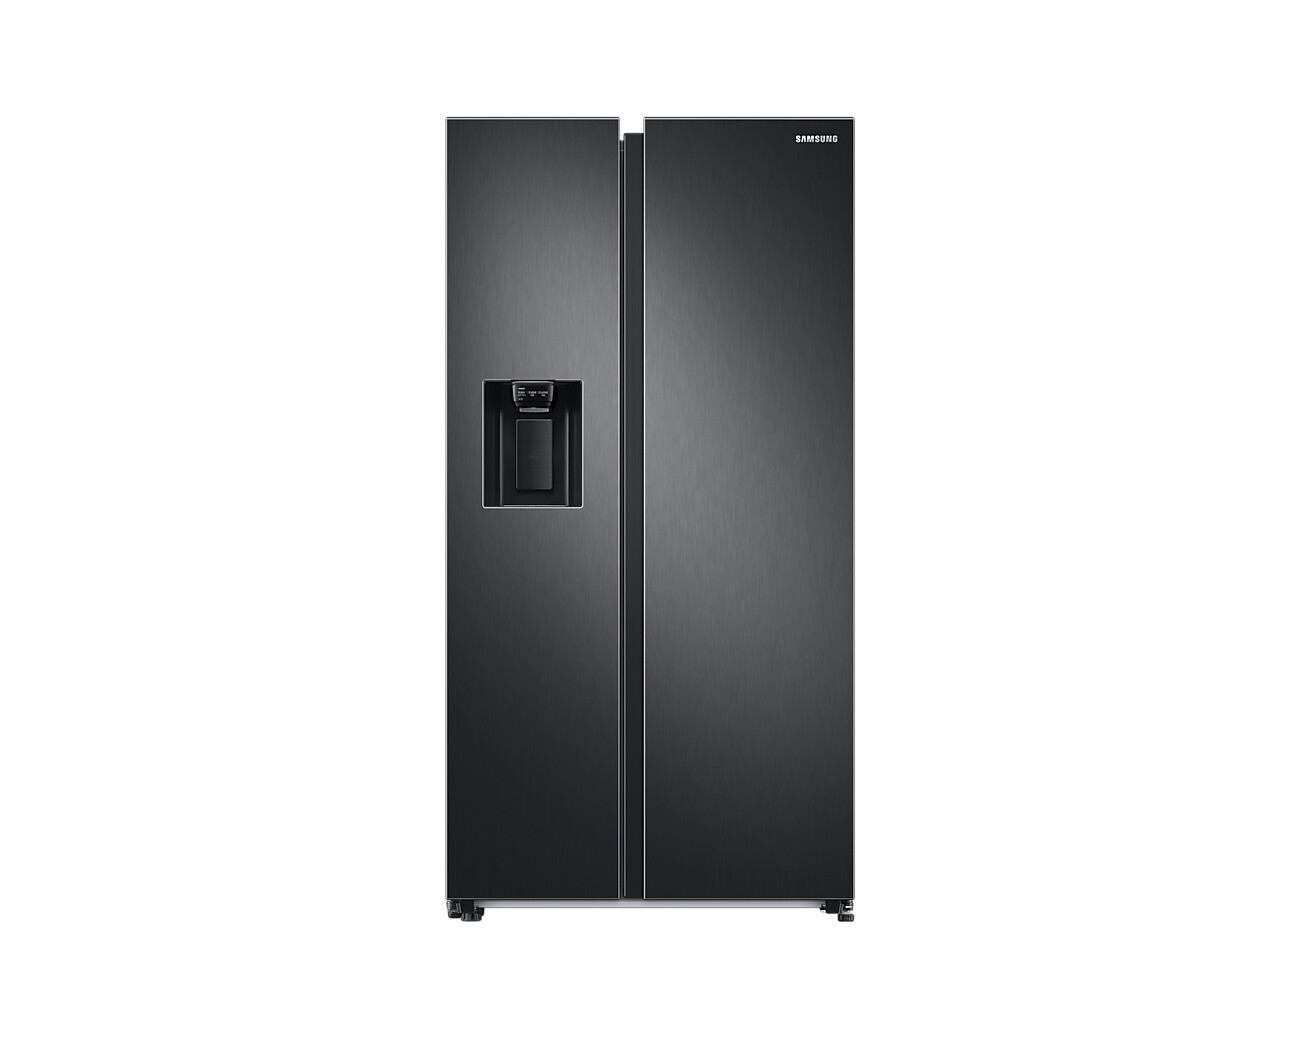 Samsung Series 8 RS68A884CB1 Plumbed Frost Free American Fridge Freezer – Black – C Rated #365405